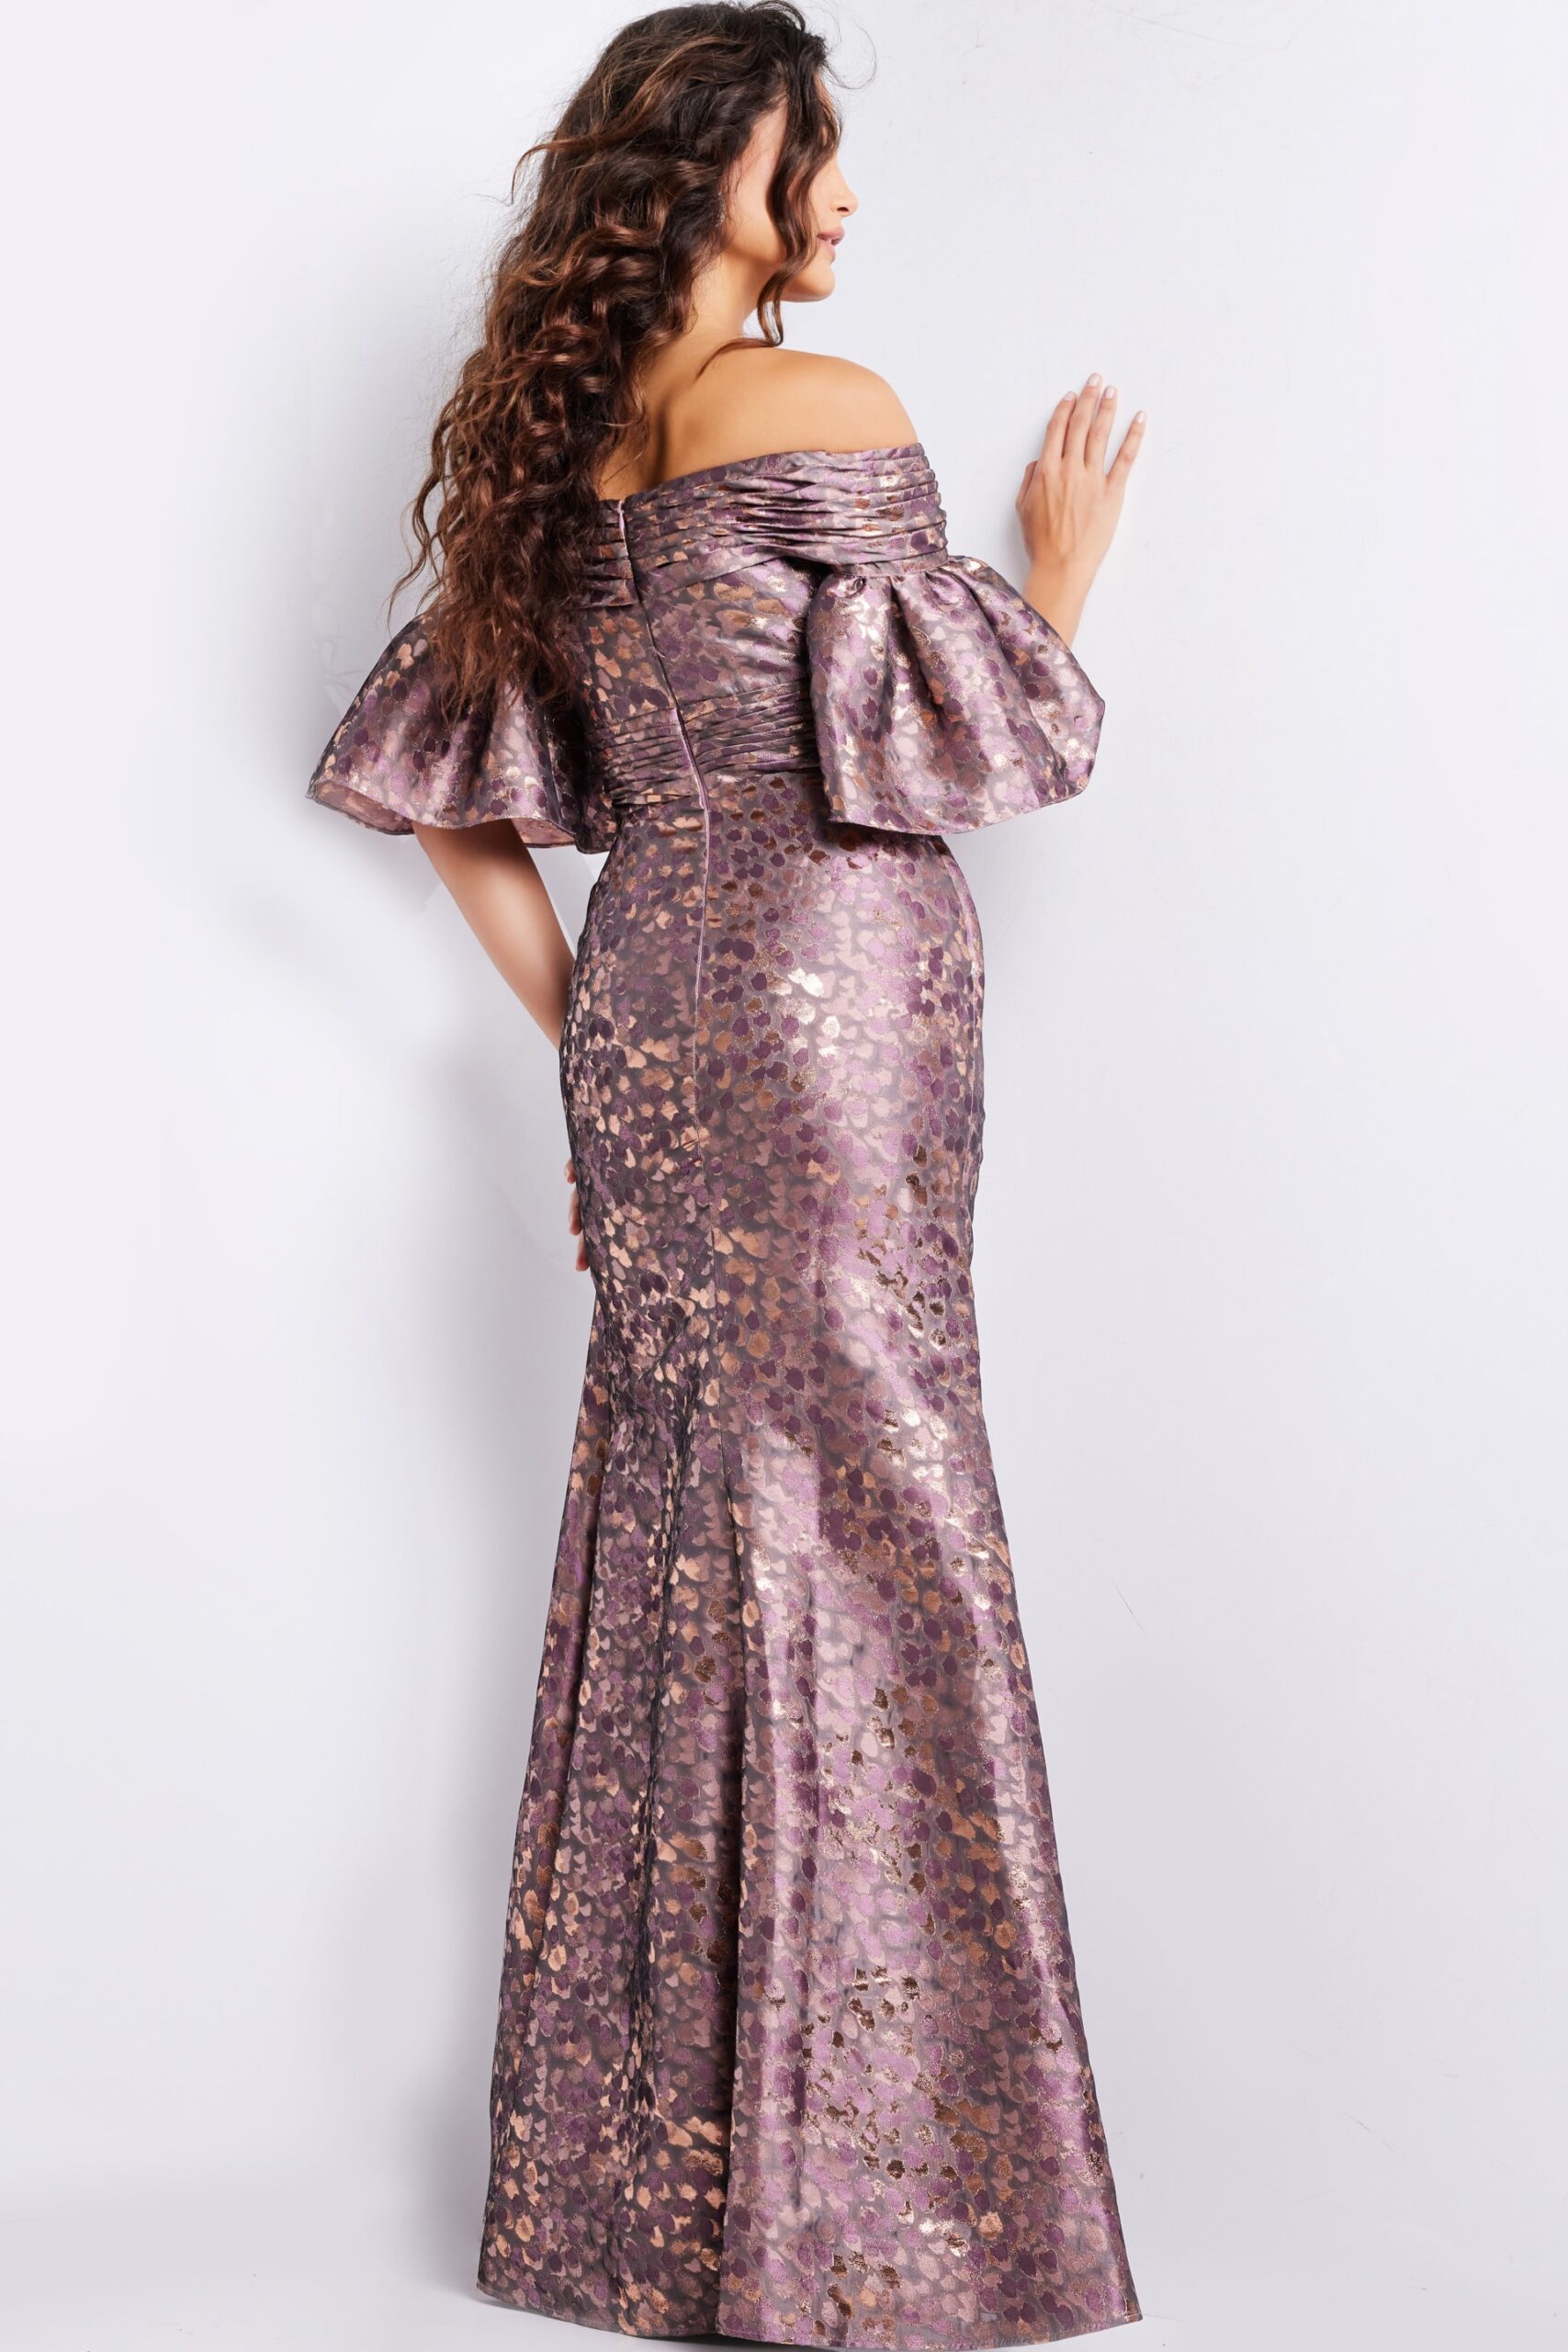 Brown and Gold Floral Sheath Formal Dress 26258